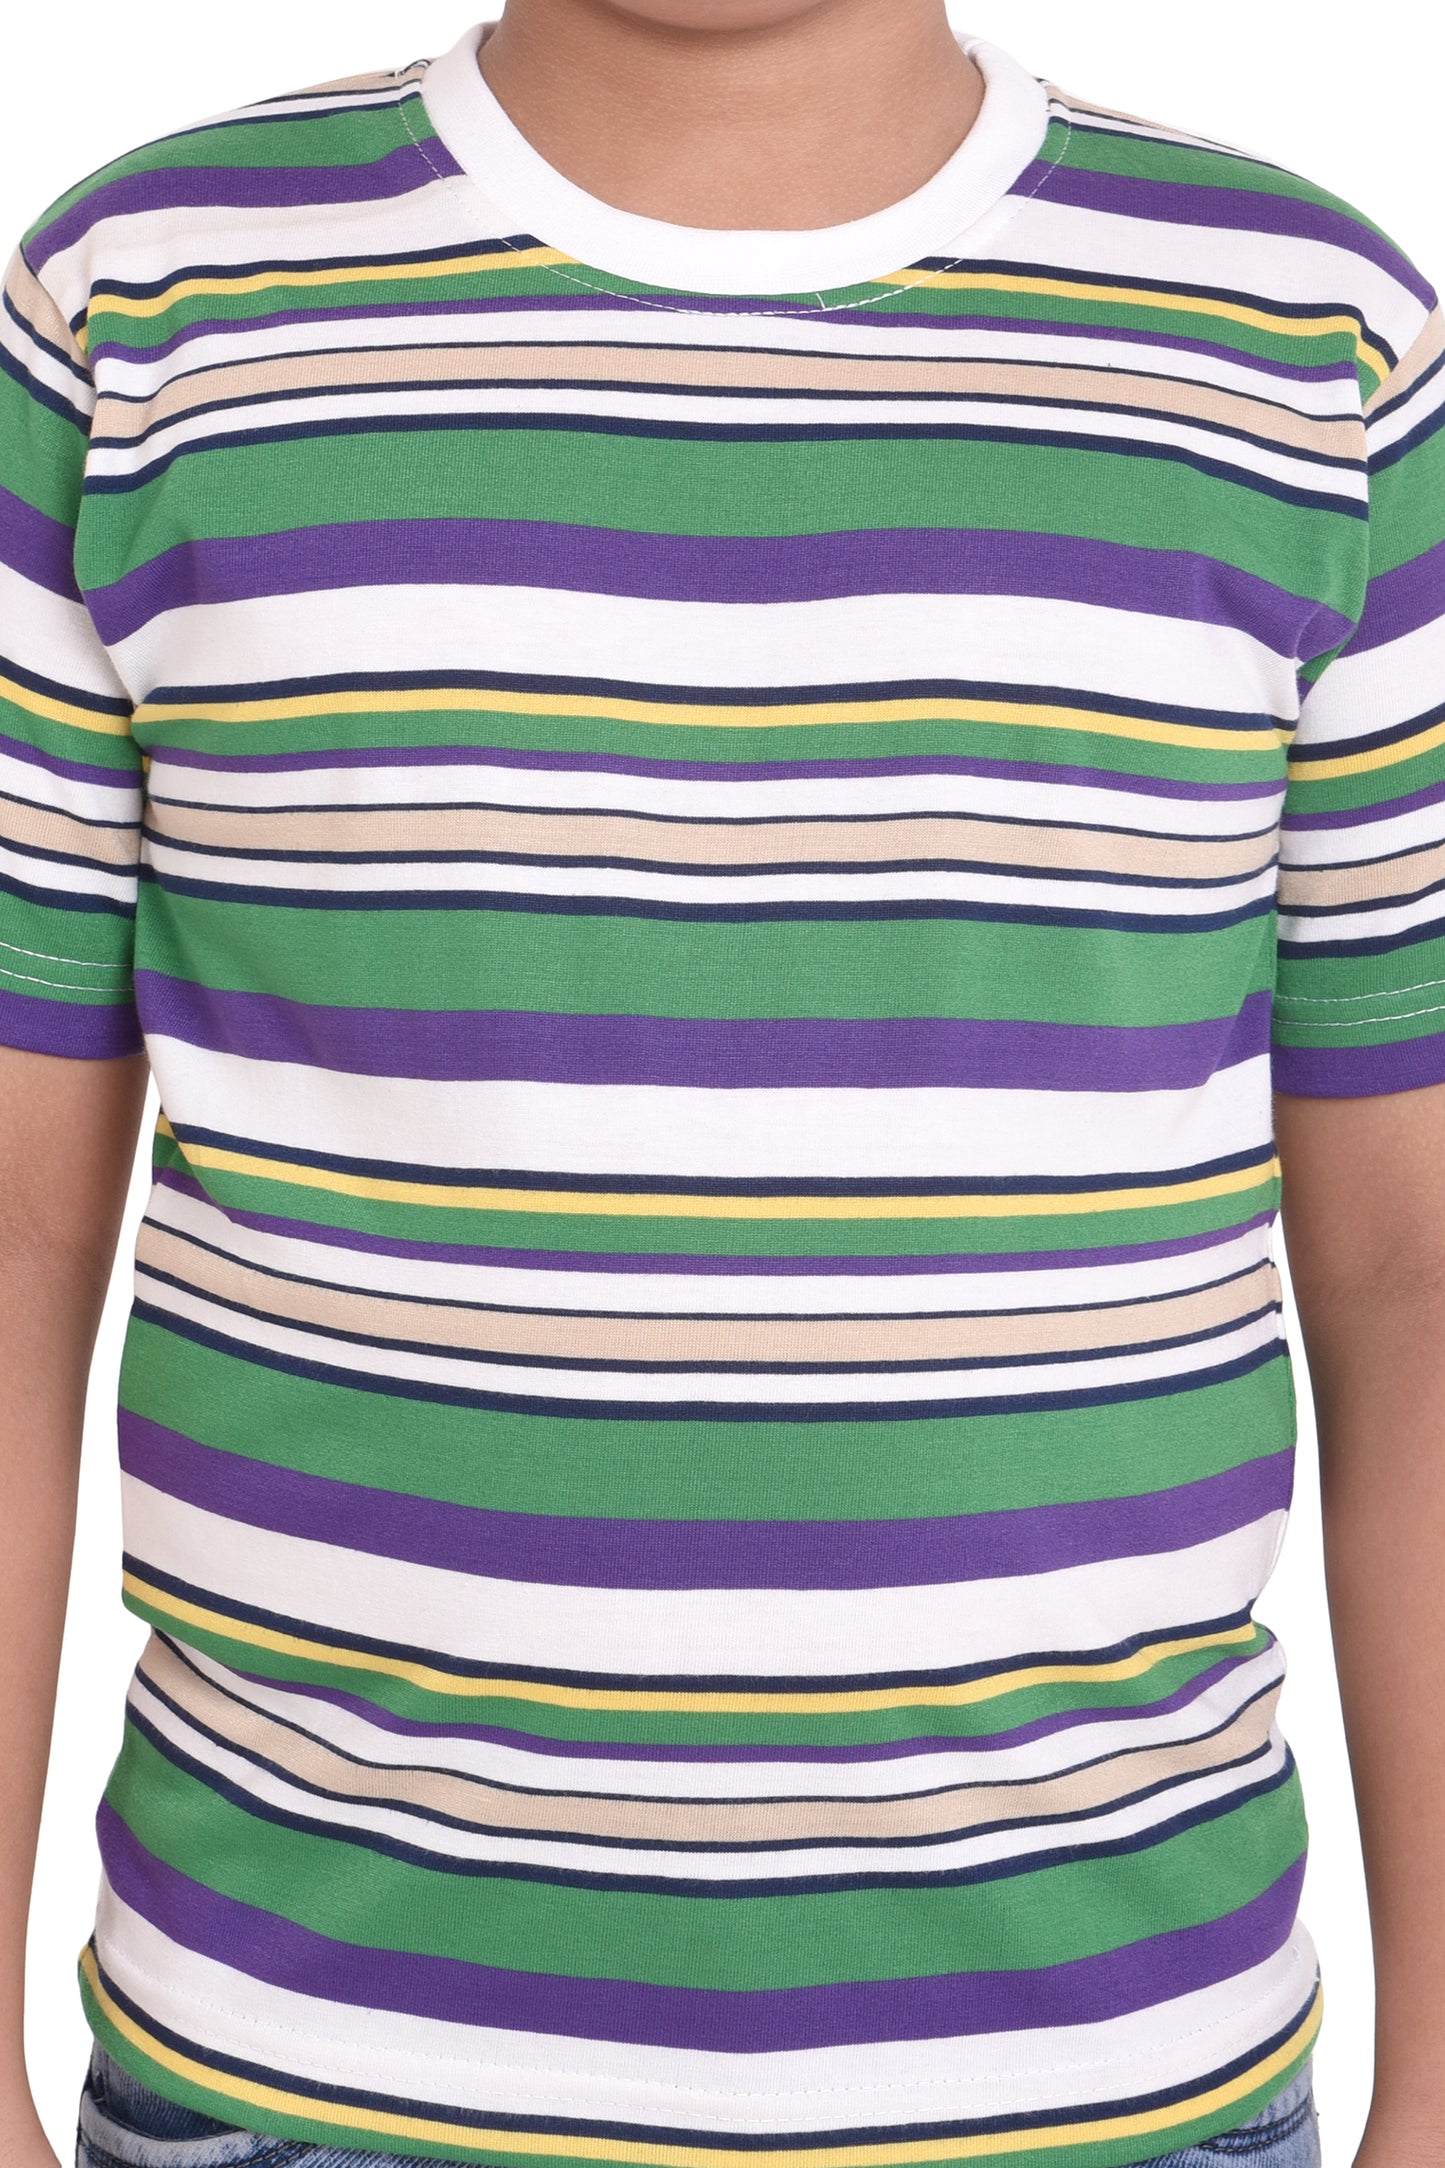 Neo Garments Boys Round Neck Cotton Striped T-Shirt. Multicolor. | SIZE FROM 7YRS TO 14YRS